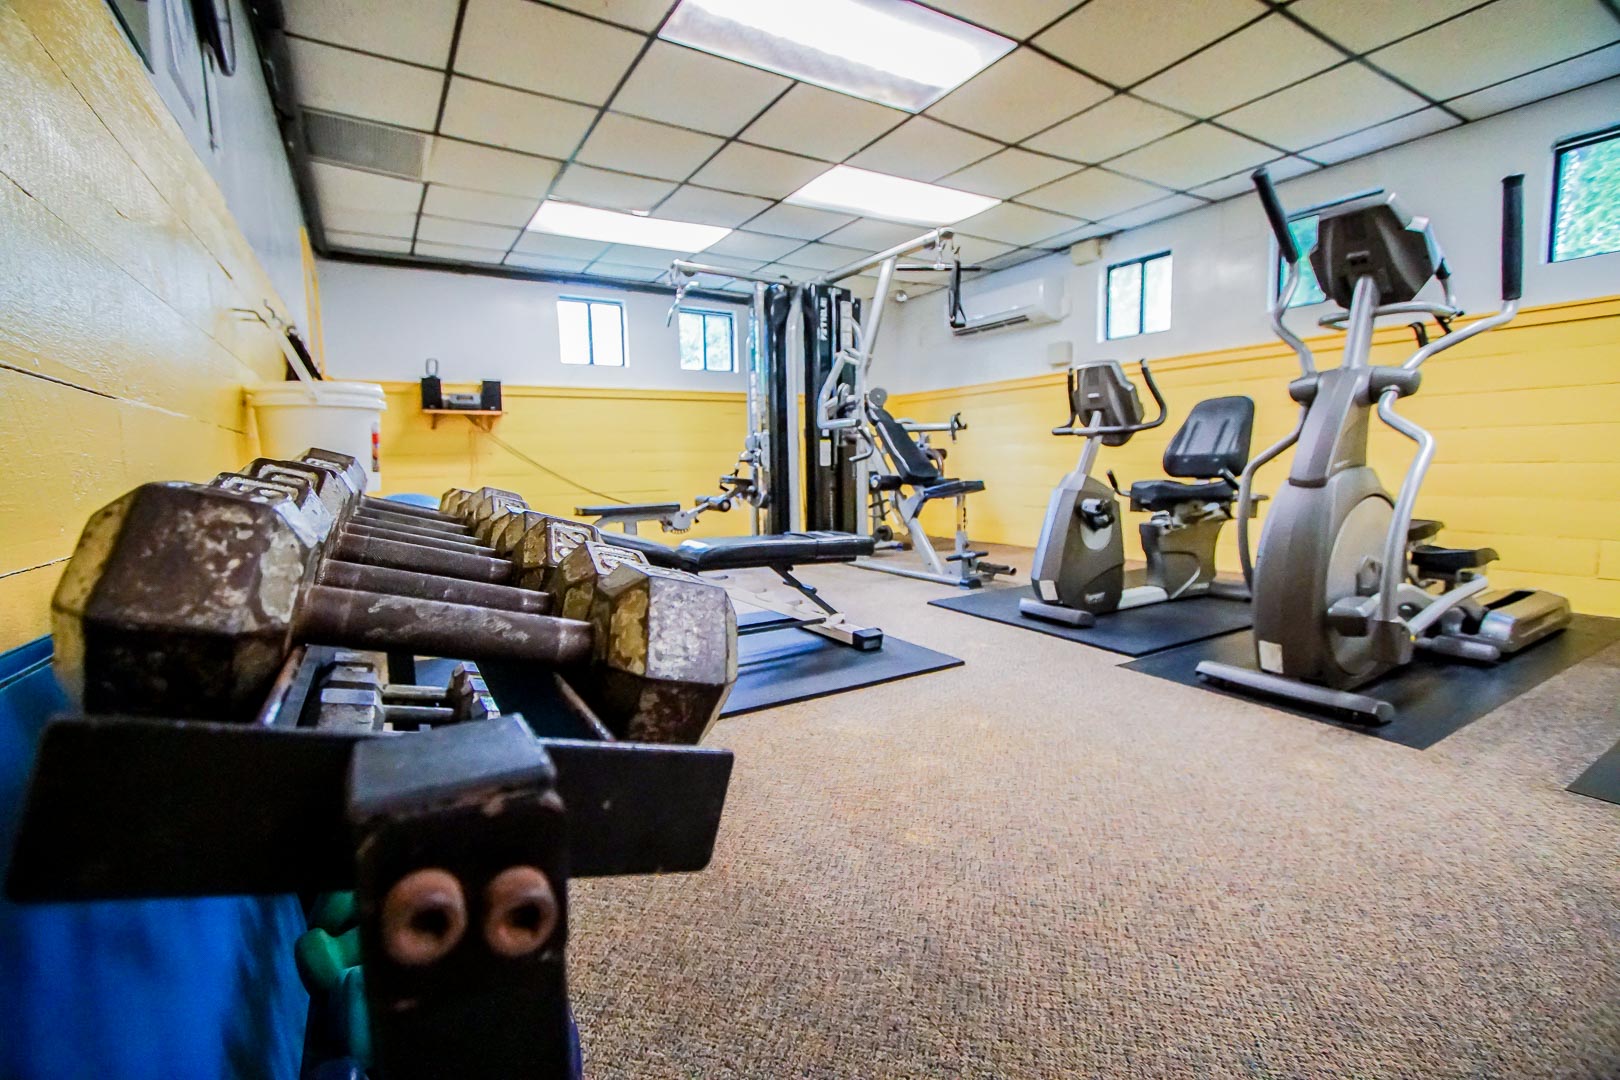 Resort amenities such as an exercise room available at VRI's Sea Mist Resort in Massachusetts.